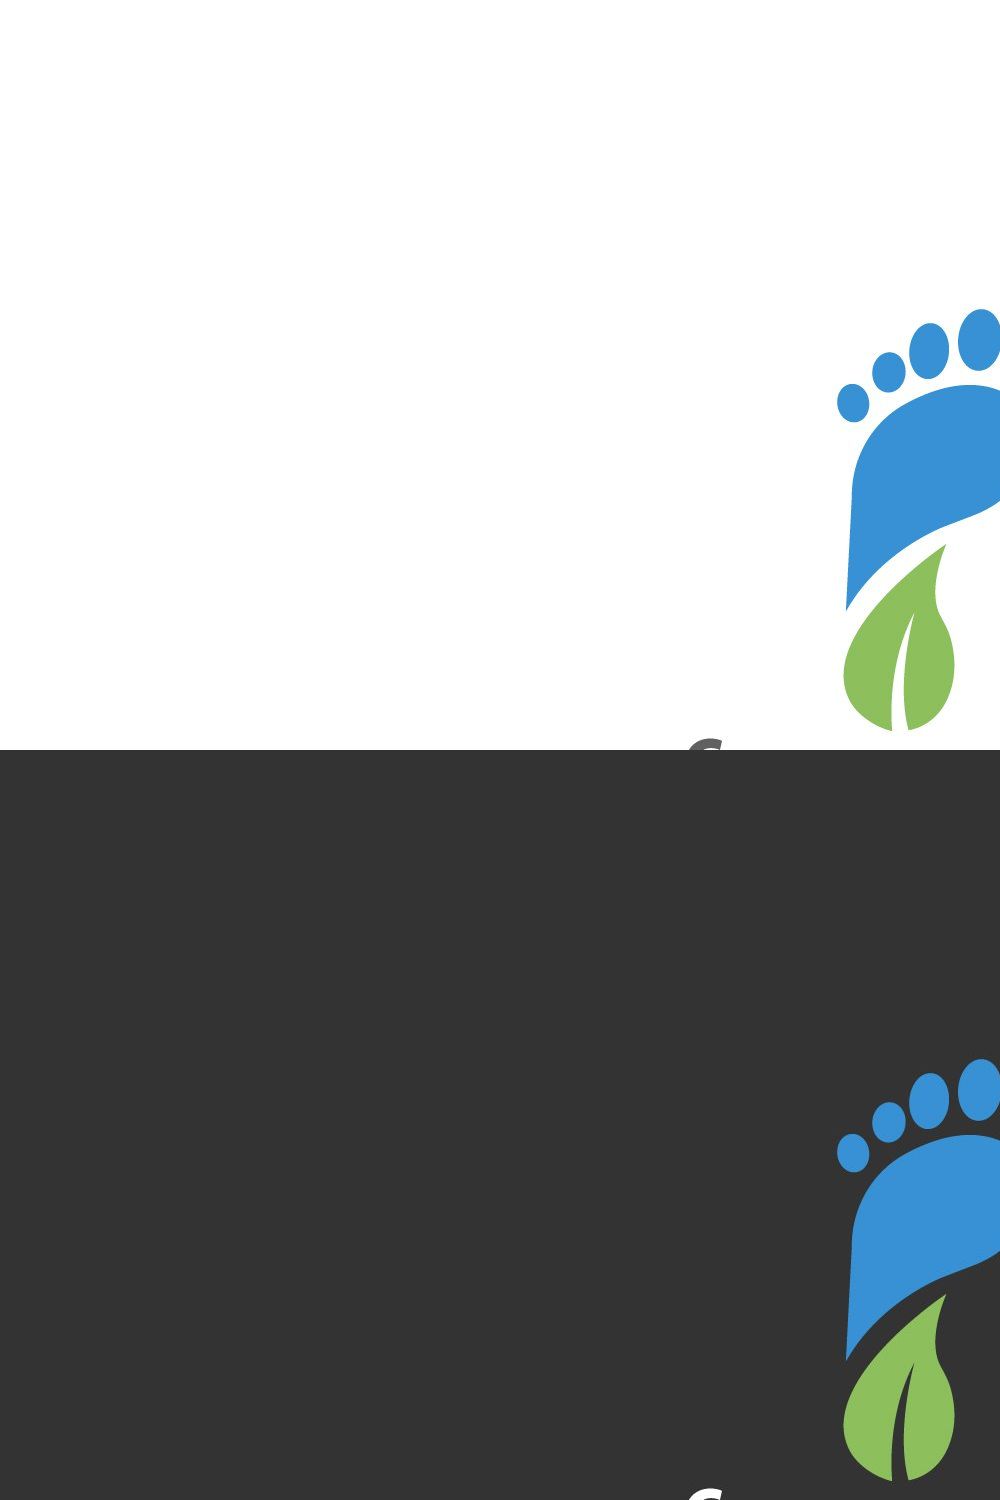 foot care logo pinterest preview image.